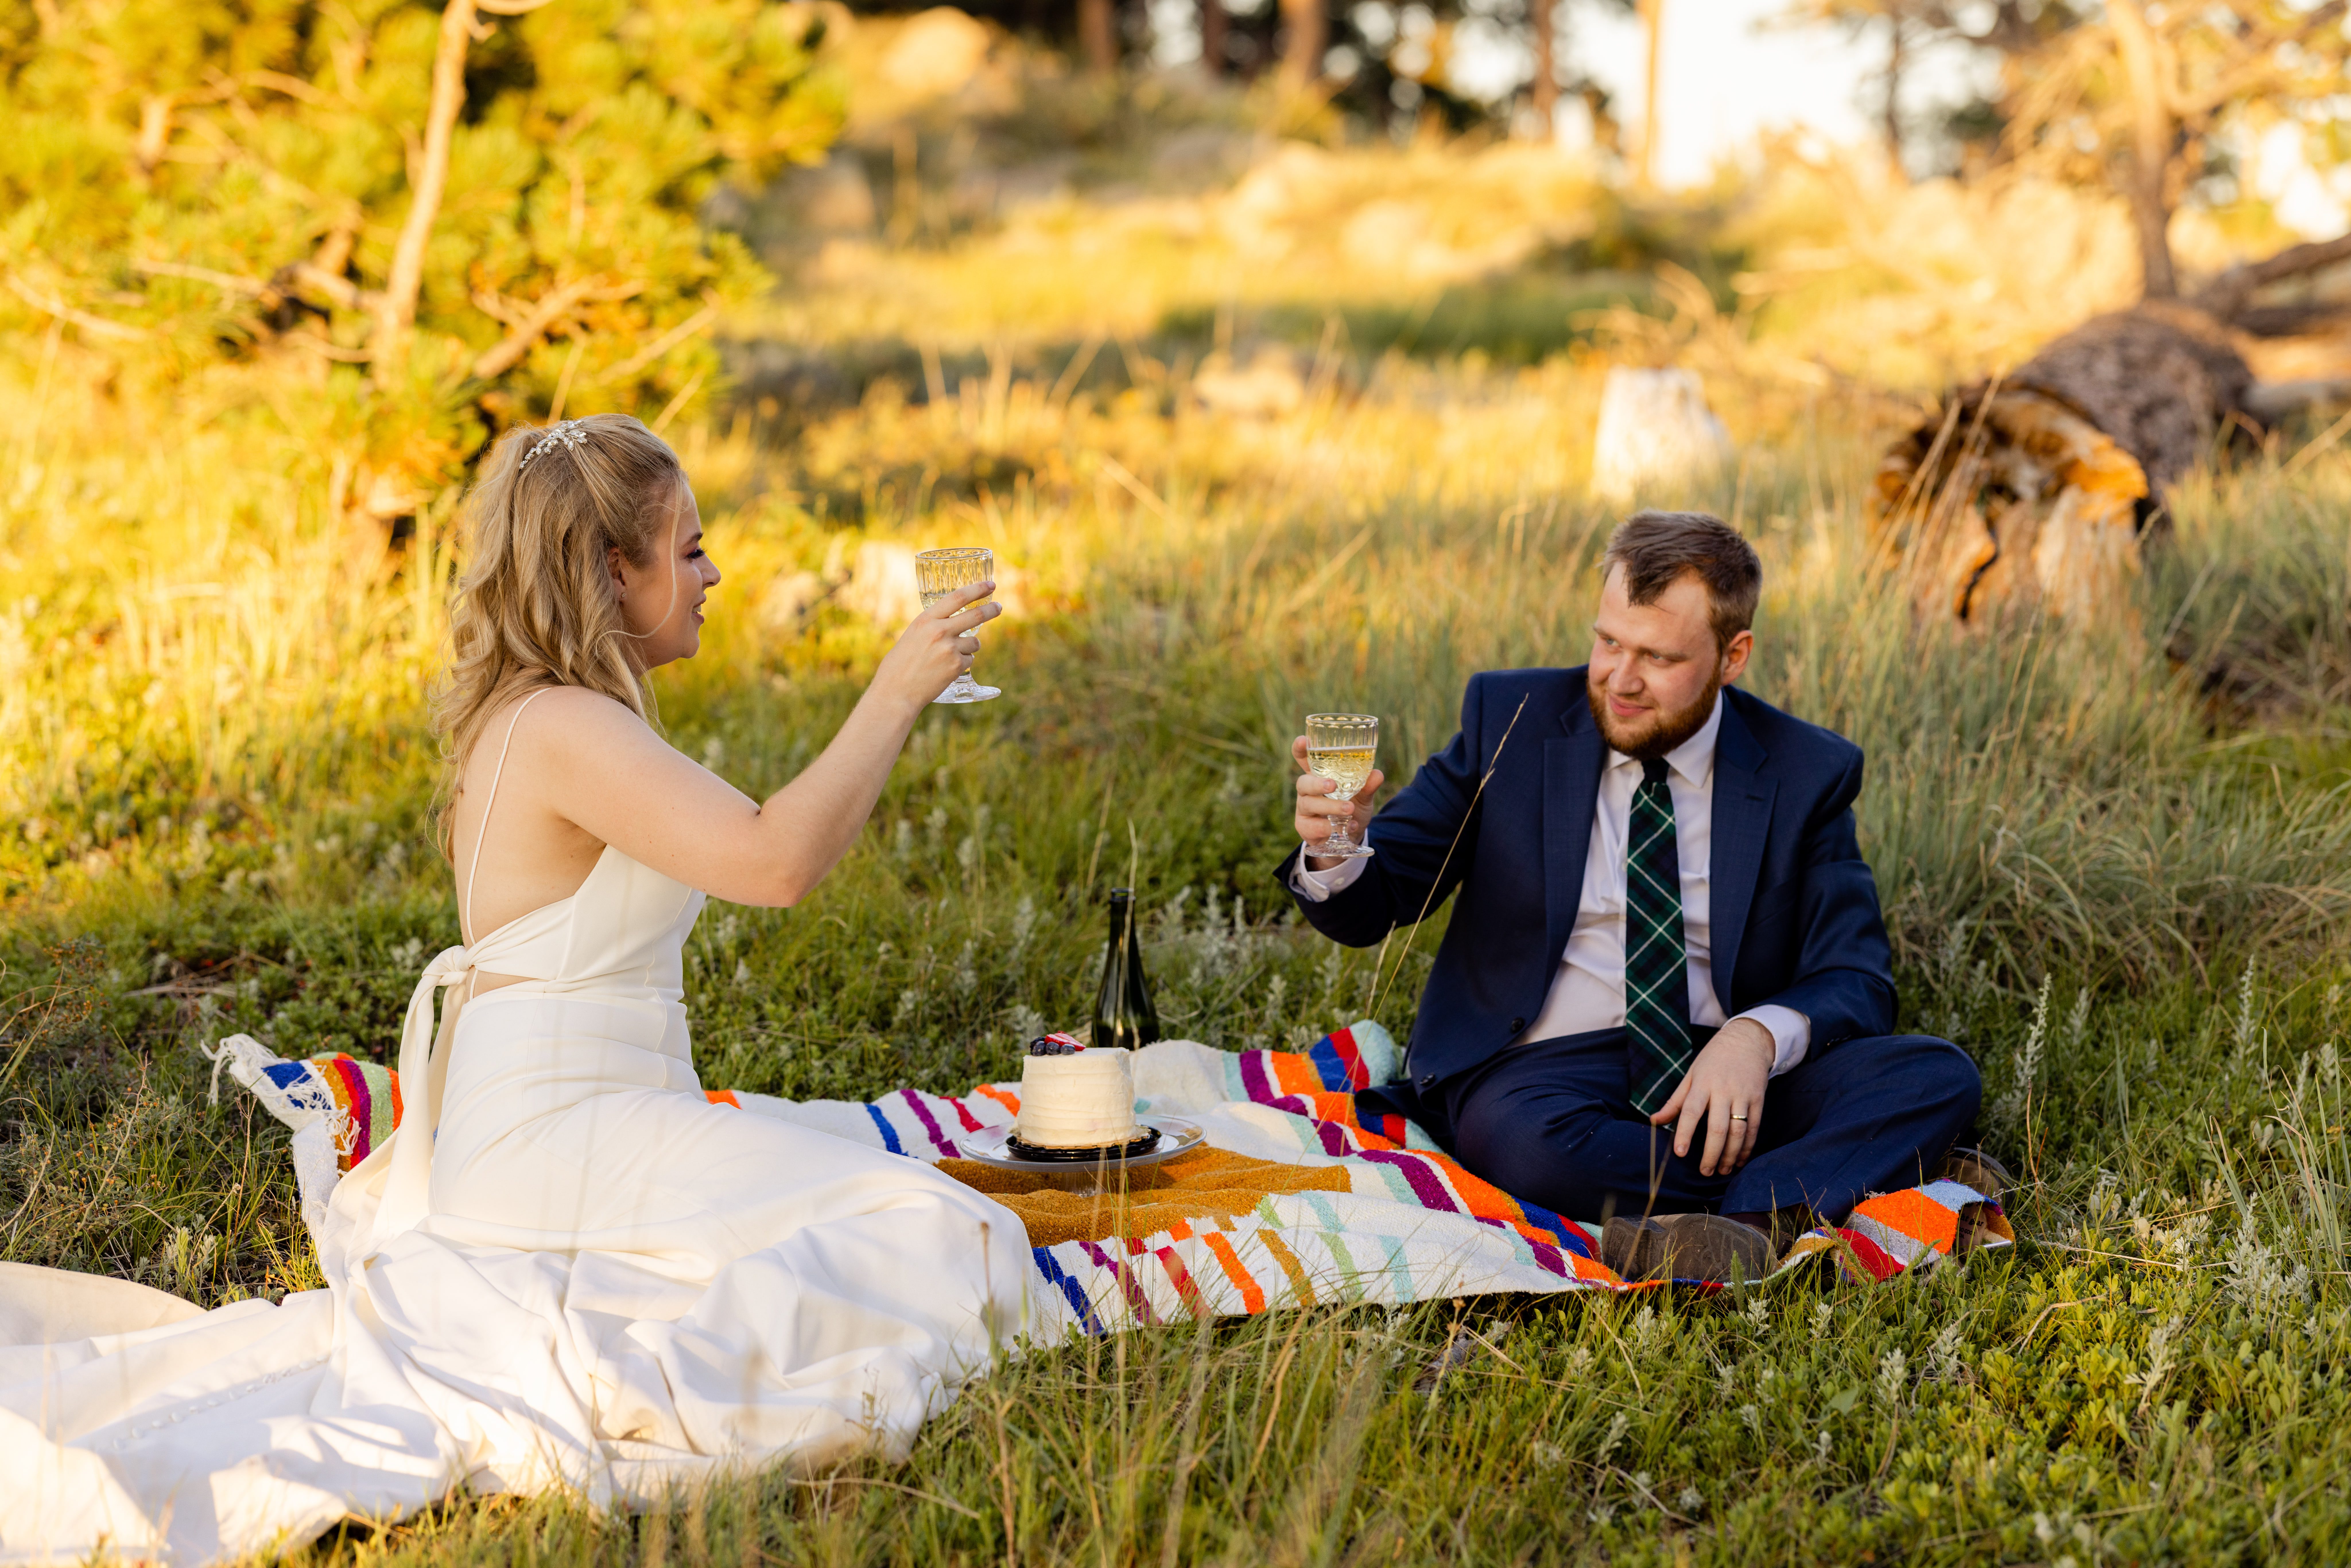 The bride and groom raise their glasses to each other during their picnic after their Sunrise Amphitheater wedding.